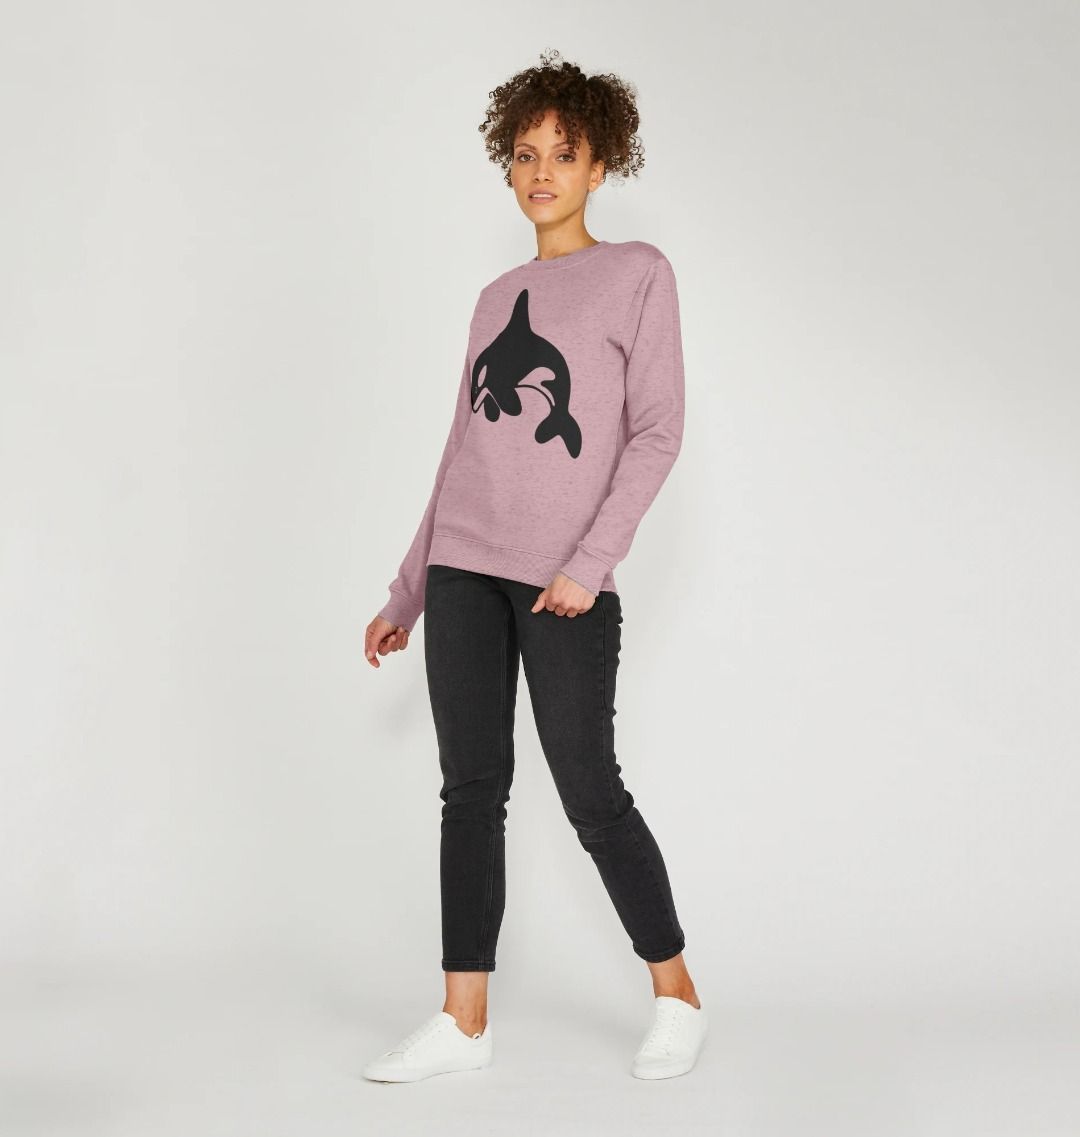 Orca Women's Remill Sweater